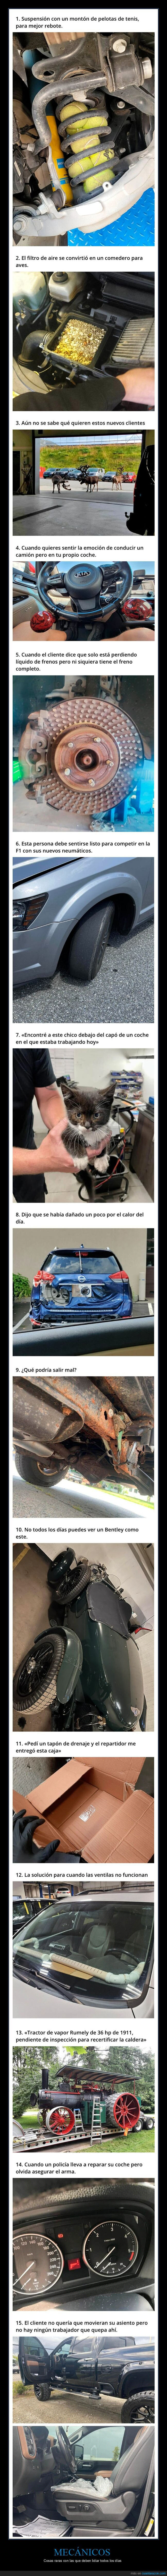 coches,mecánicos,wtf